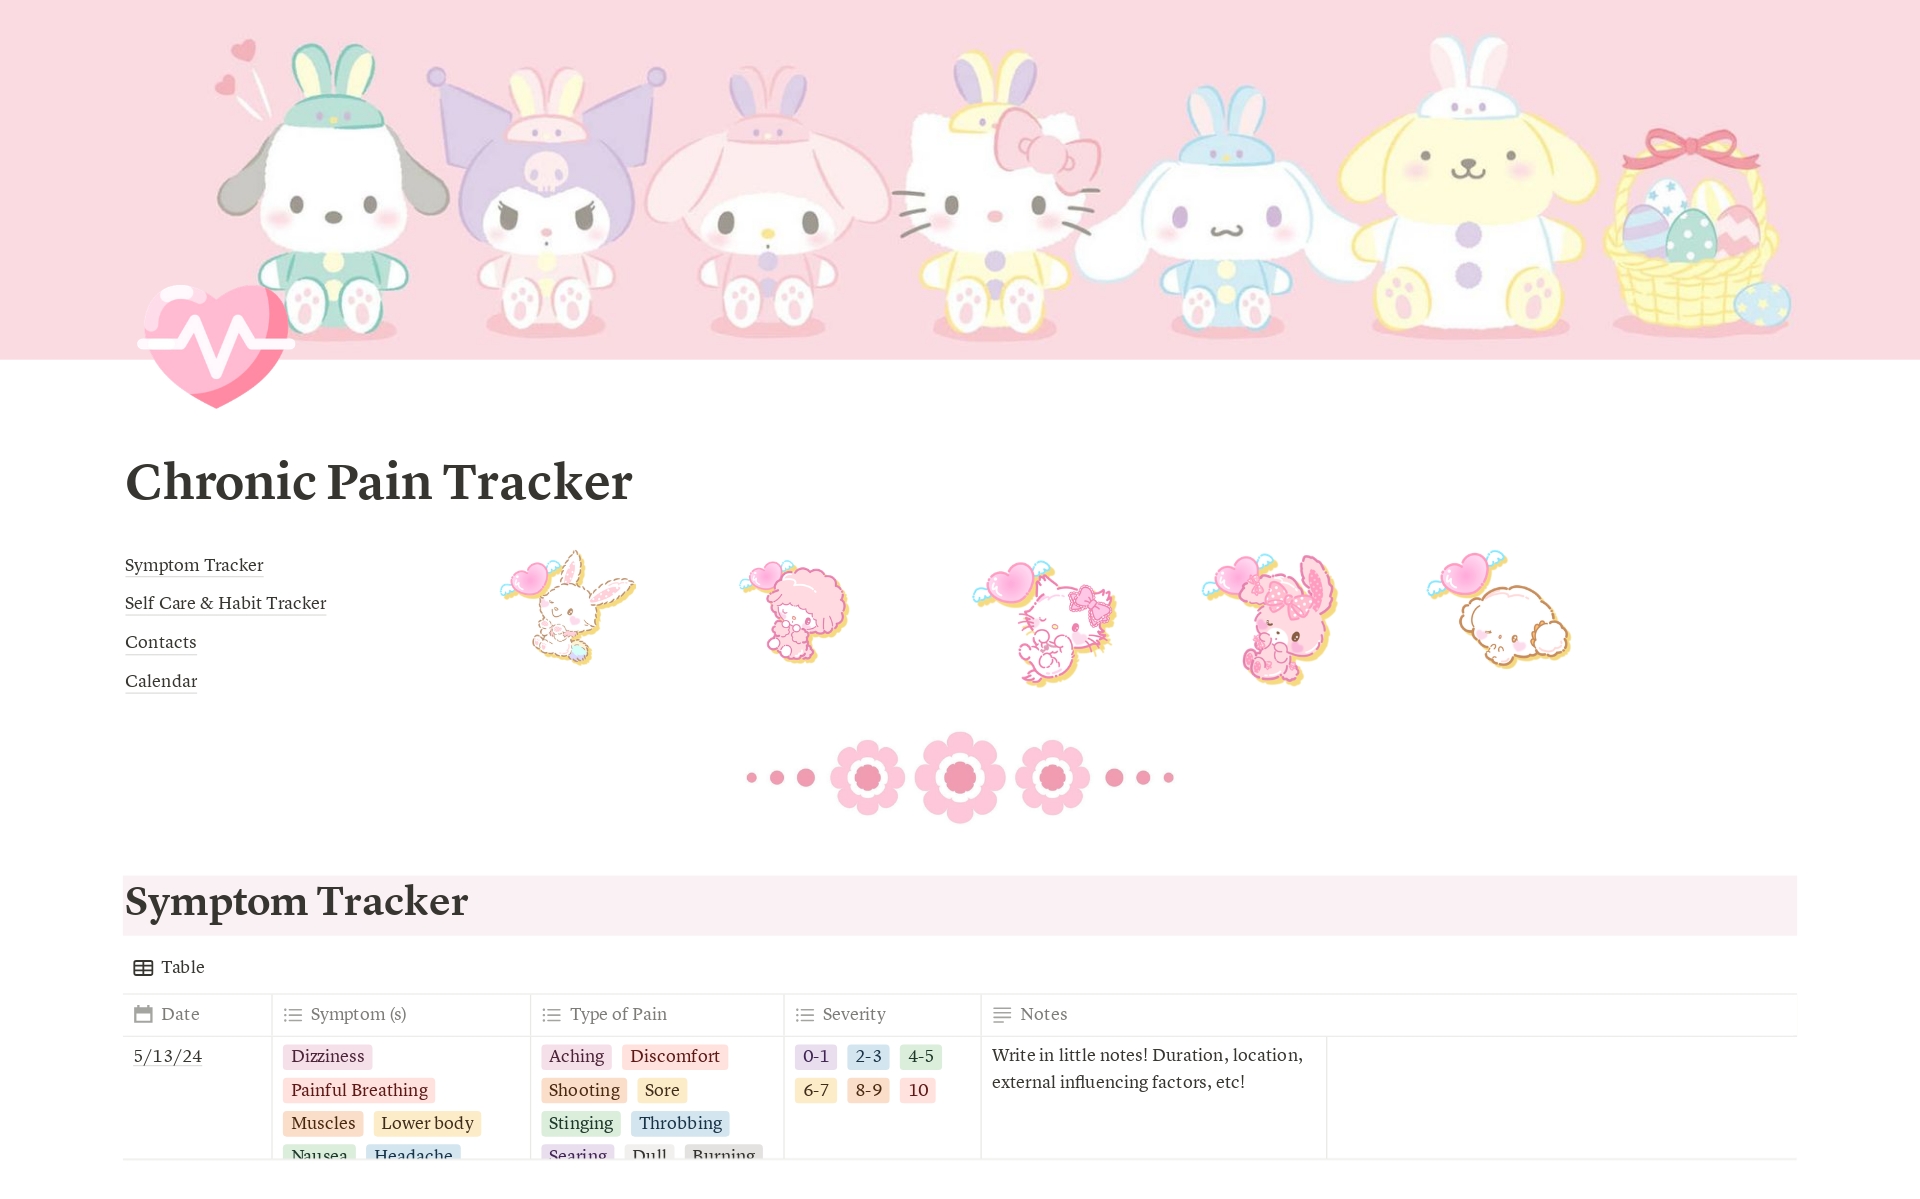 chronic pain tracker with a soft pink sanrio theme! designed to be cute and uplifting <3

best in wide view! personalization encouraged